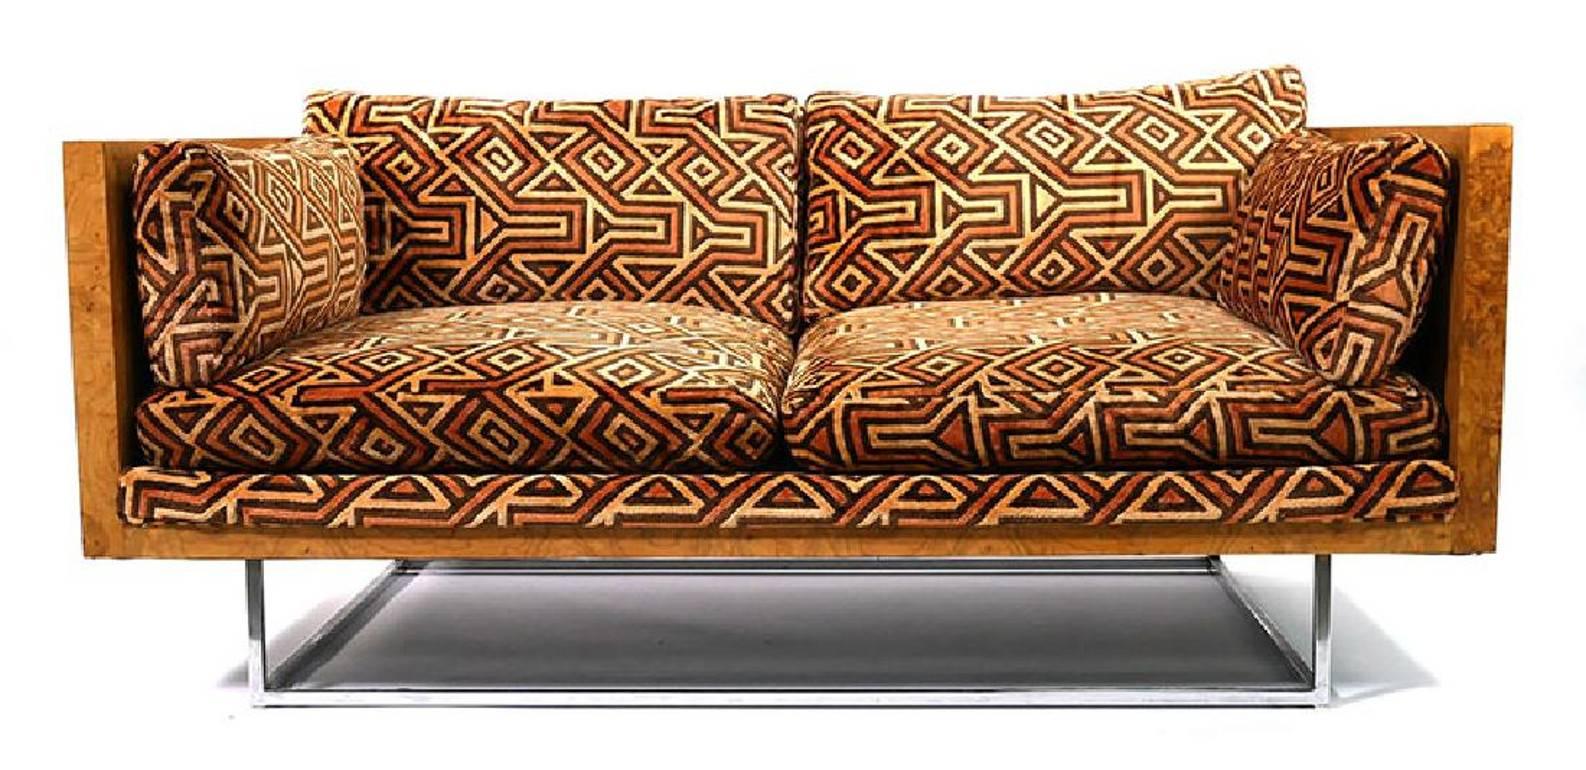 Stunning Milo Baughman for Thayer Coggin sofa with wraparound burl wood and chrome legs. Comes with original Jack Lenor Larsen upholstery with cool African inspired print from the 1970s.